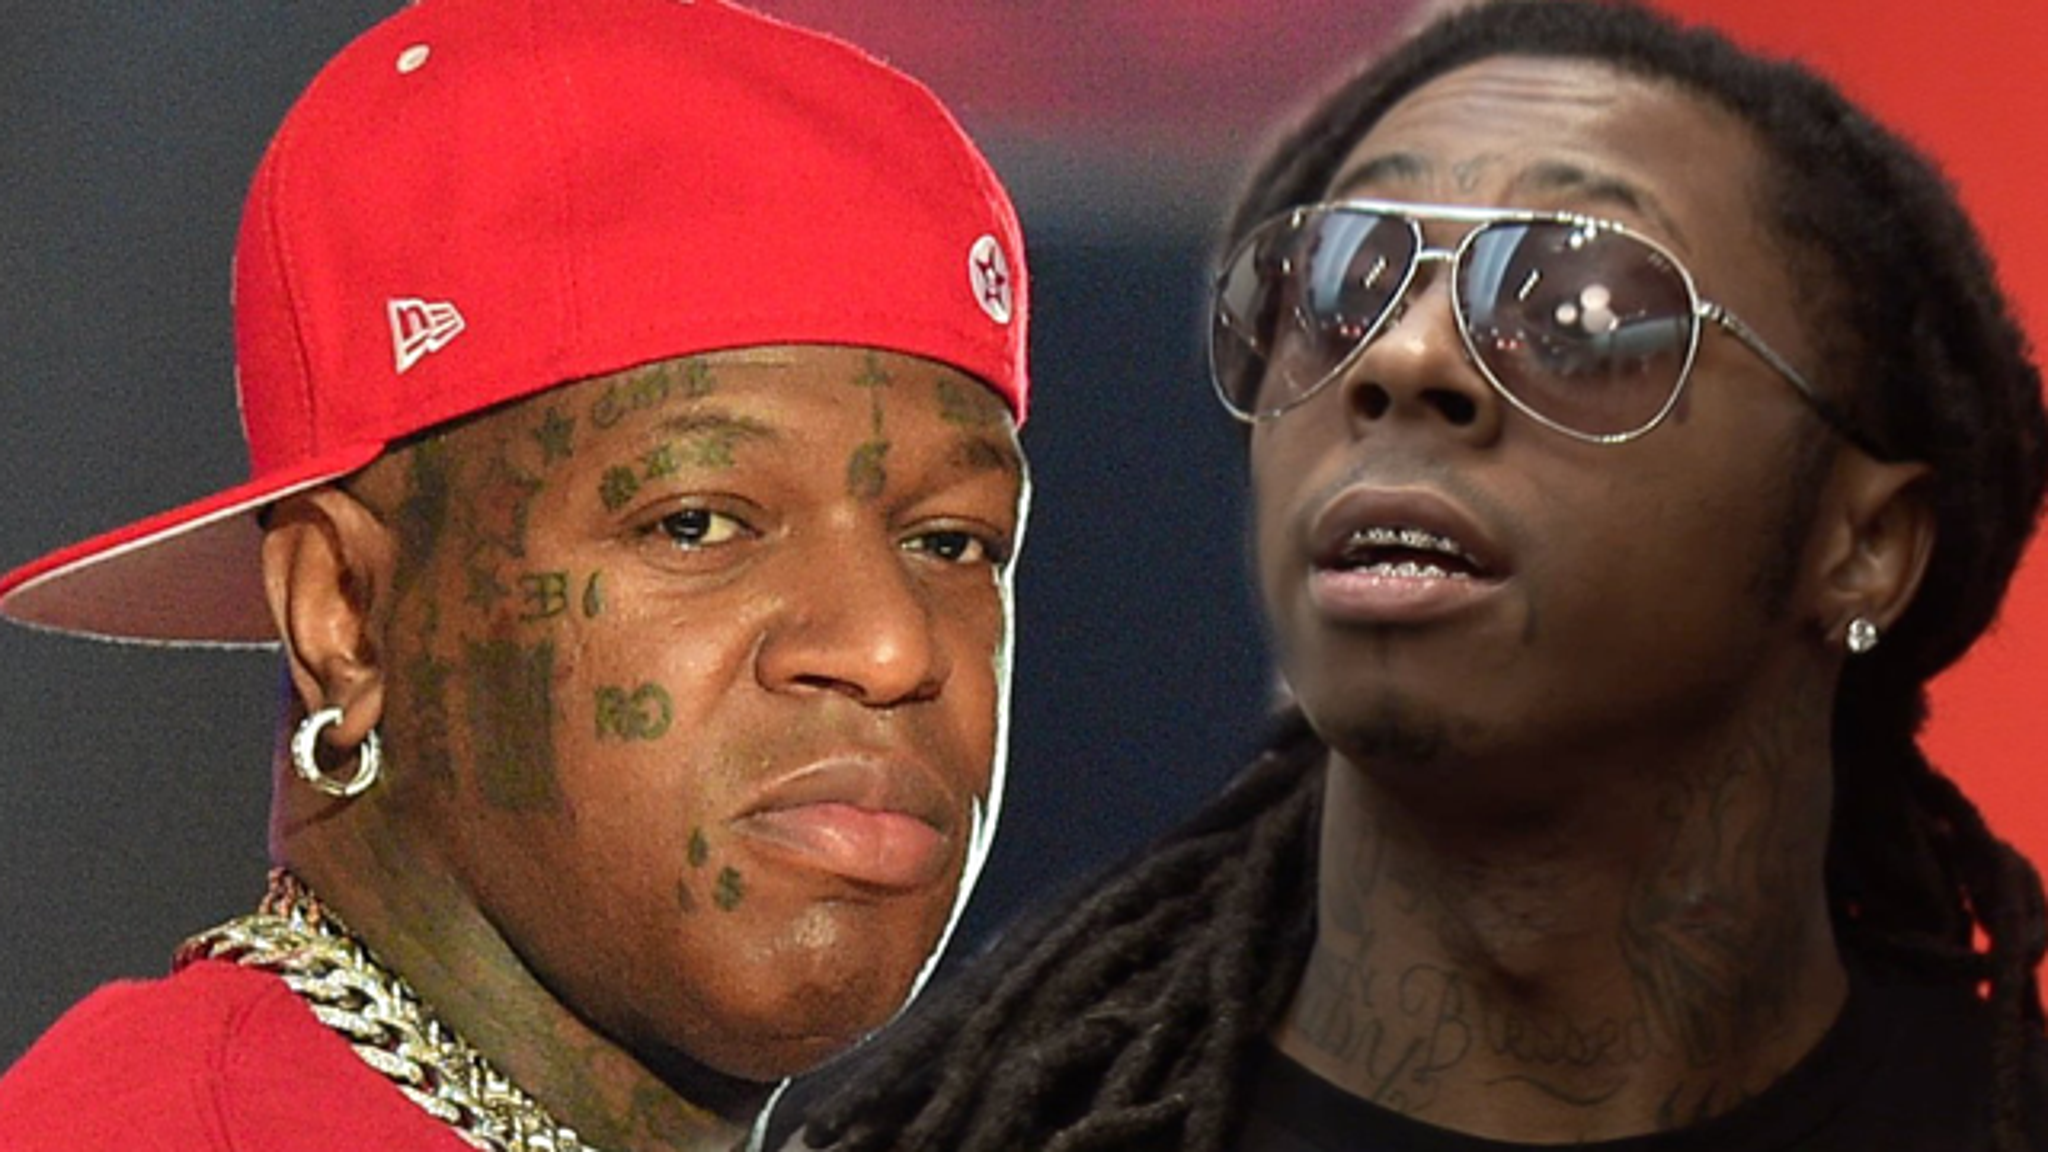 Lil Wayne Rips Birdman With New Song